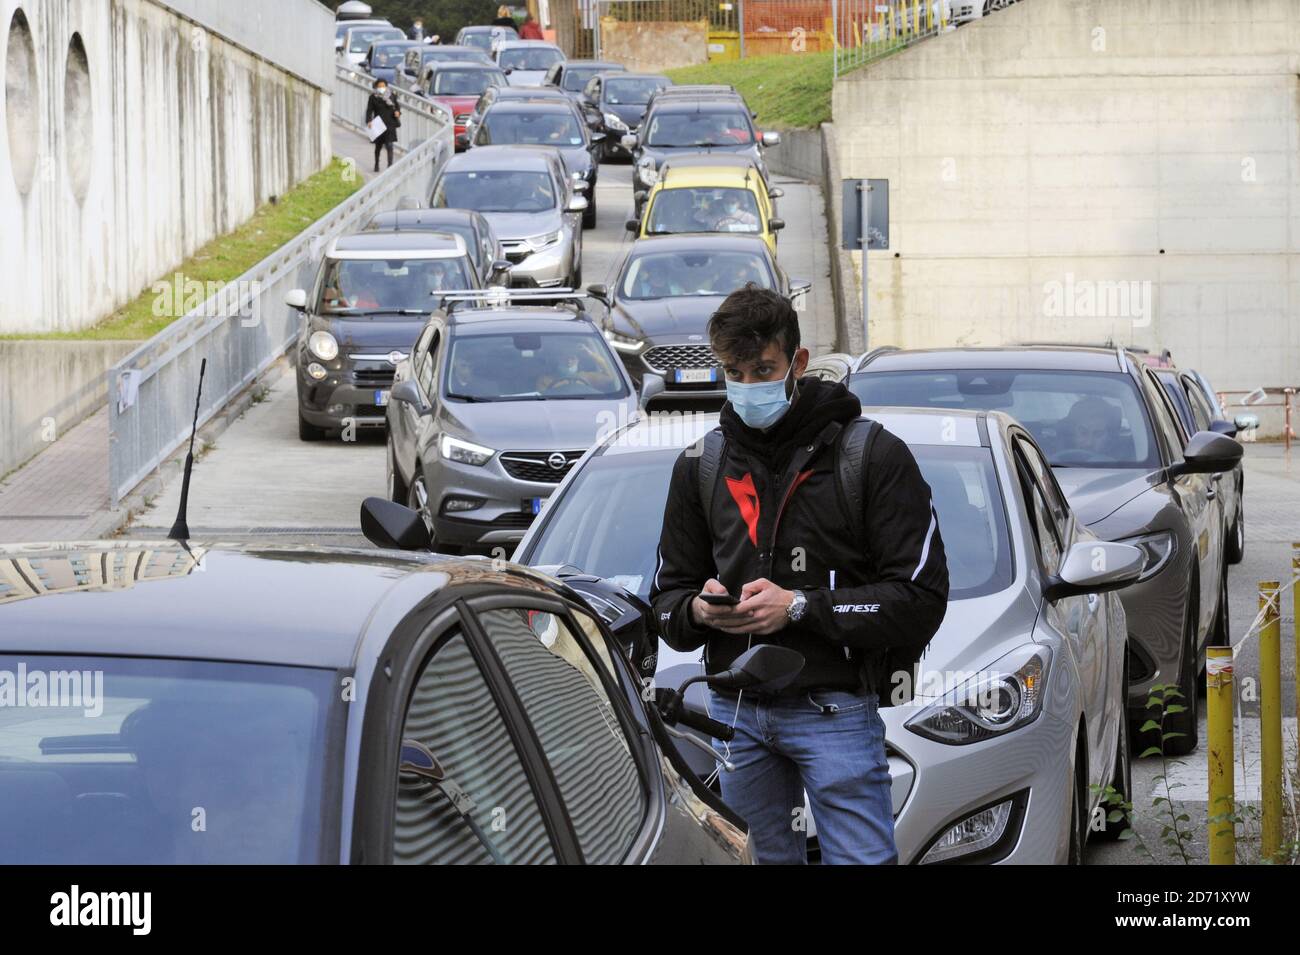 Milan (Italy), San Paolo hospital, in these days long car queues and many hours of waiting in all the hospitals that offer the 'drive through' service for picking up without getting out of car the nasopharyngeal swab  for the diagnosis of  Covid-19 virus infection. Stock Photo